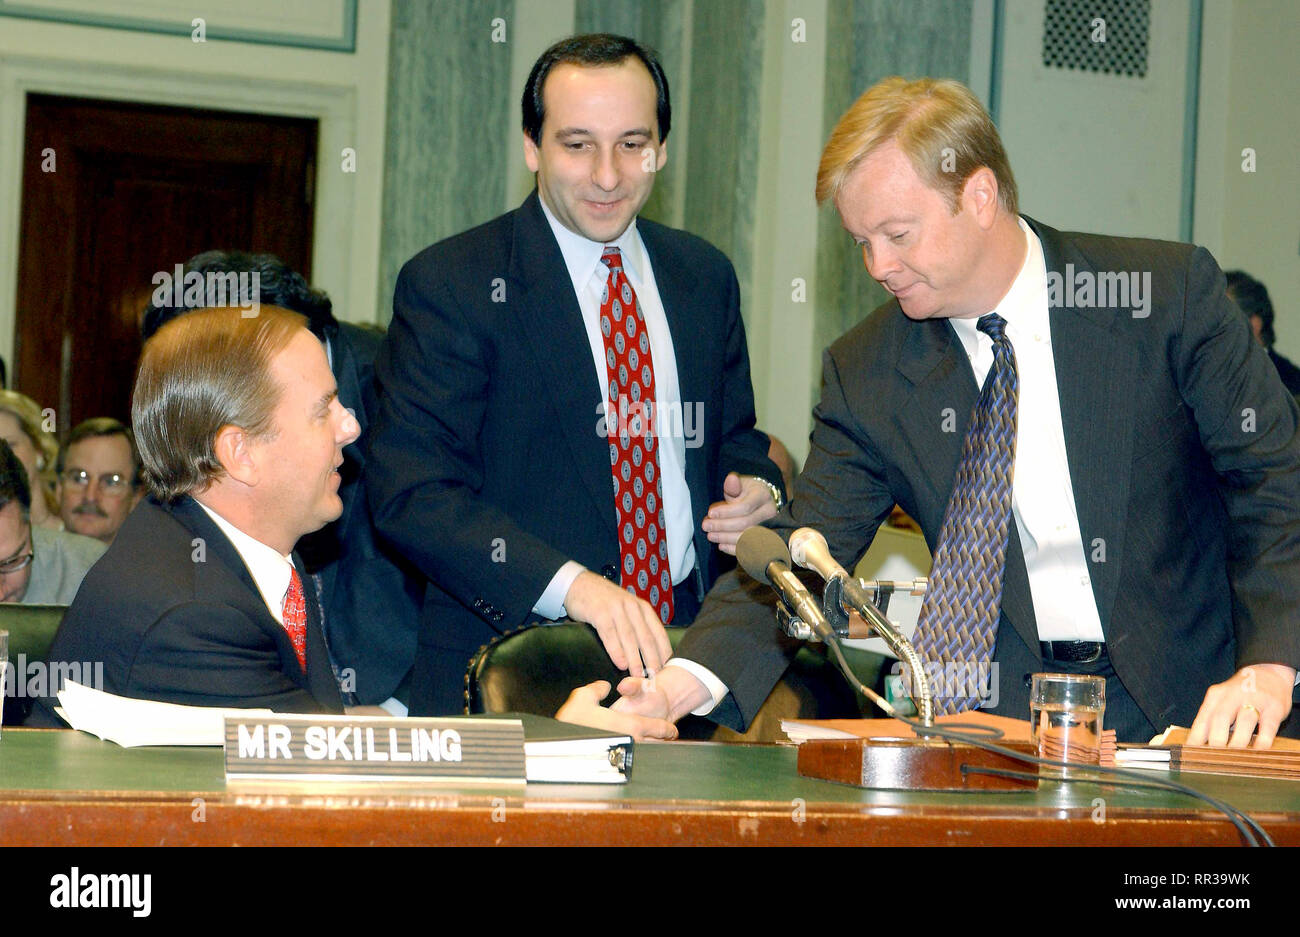 Washington, D.C. - February 26, 2002 -- Jeffrey Skilling and Jeffrey McMahon shake hands prior to testifying before the U.S. Senate Commerce, Science and Transportation Committee to examine certain issues with respect to the collapse of Enron Corporation..Credit: Ron Sachs / CNP /MediaPunch Stock Photo